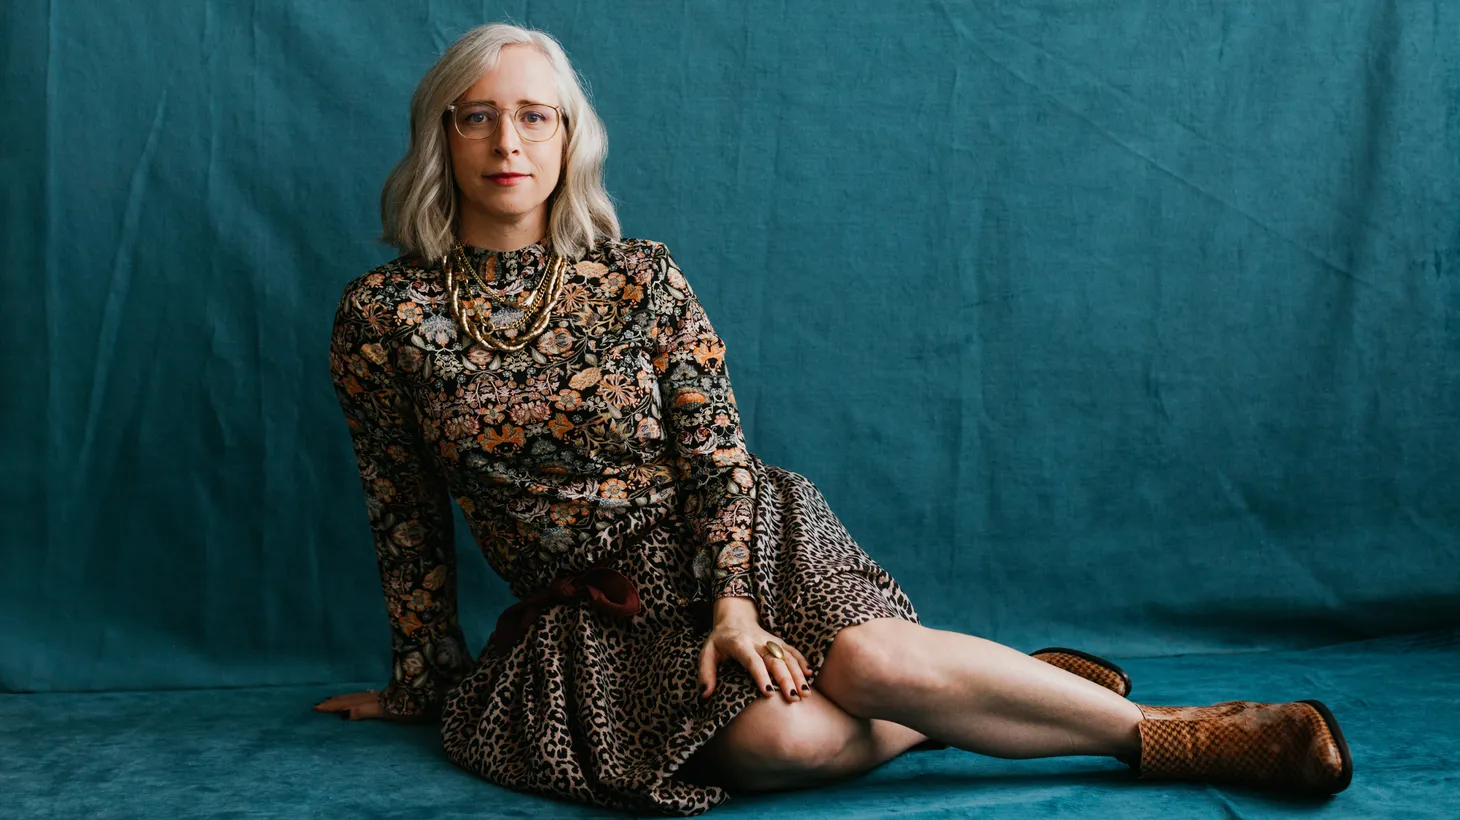 Portland songwriter Laura Veirs’ new single “Winter Windows” forecasts a new album this summer, “Found Light,” due oout July 8.